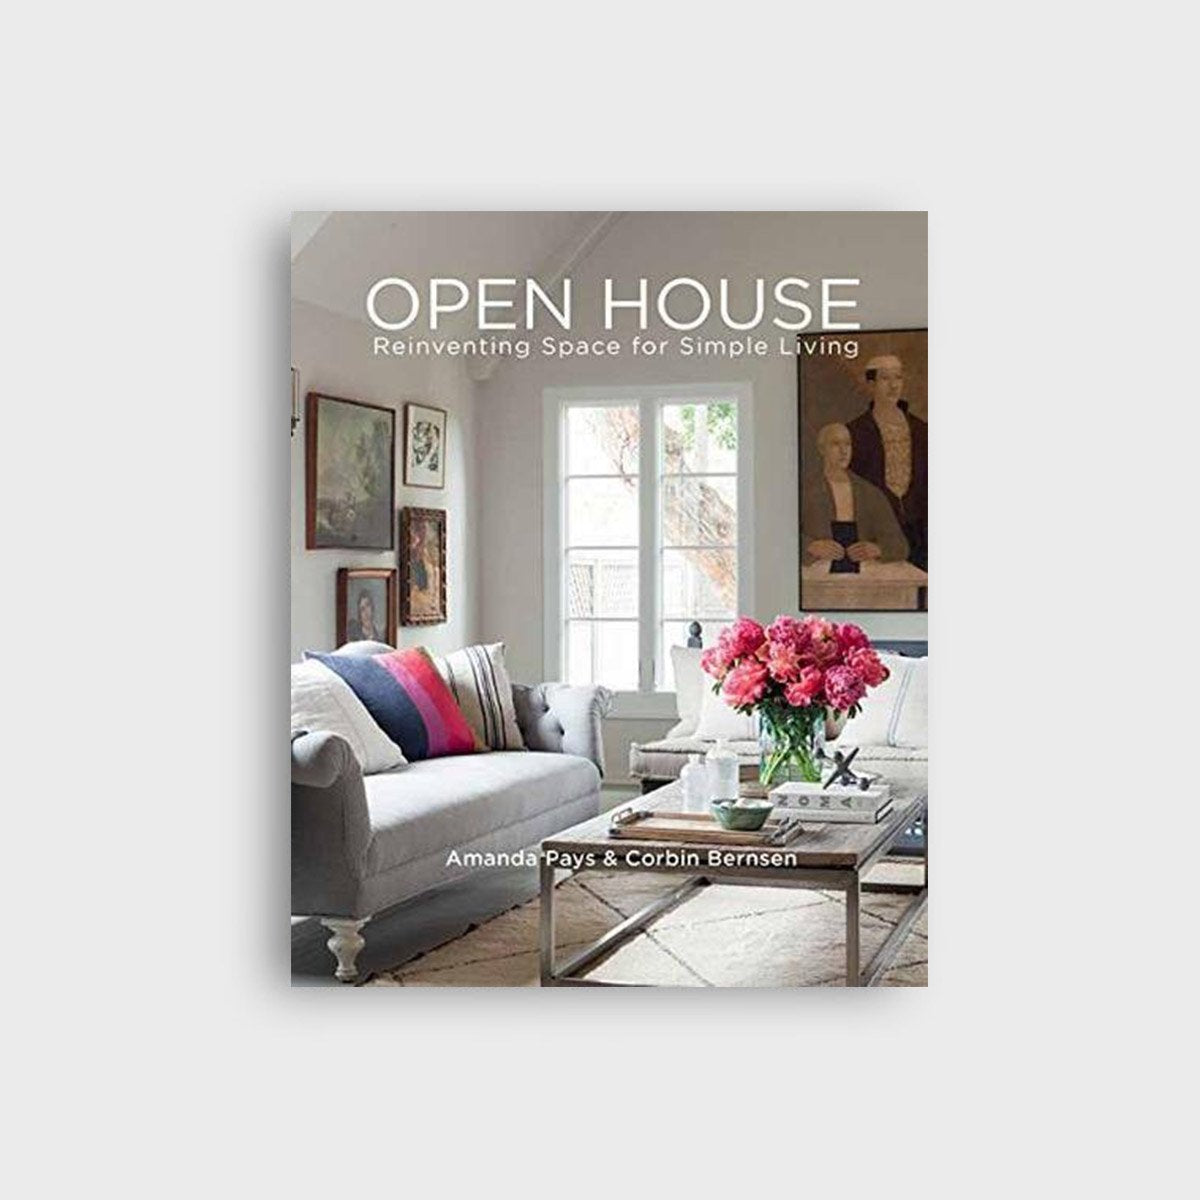 Towel & Book Gift Pack - Open House